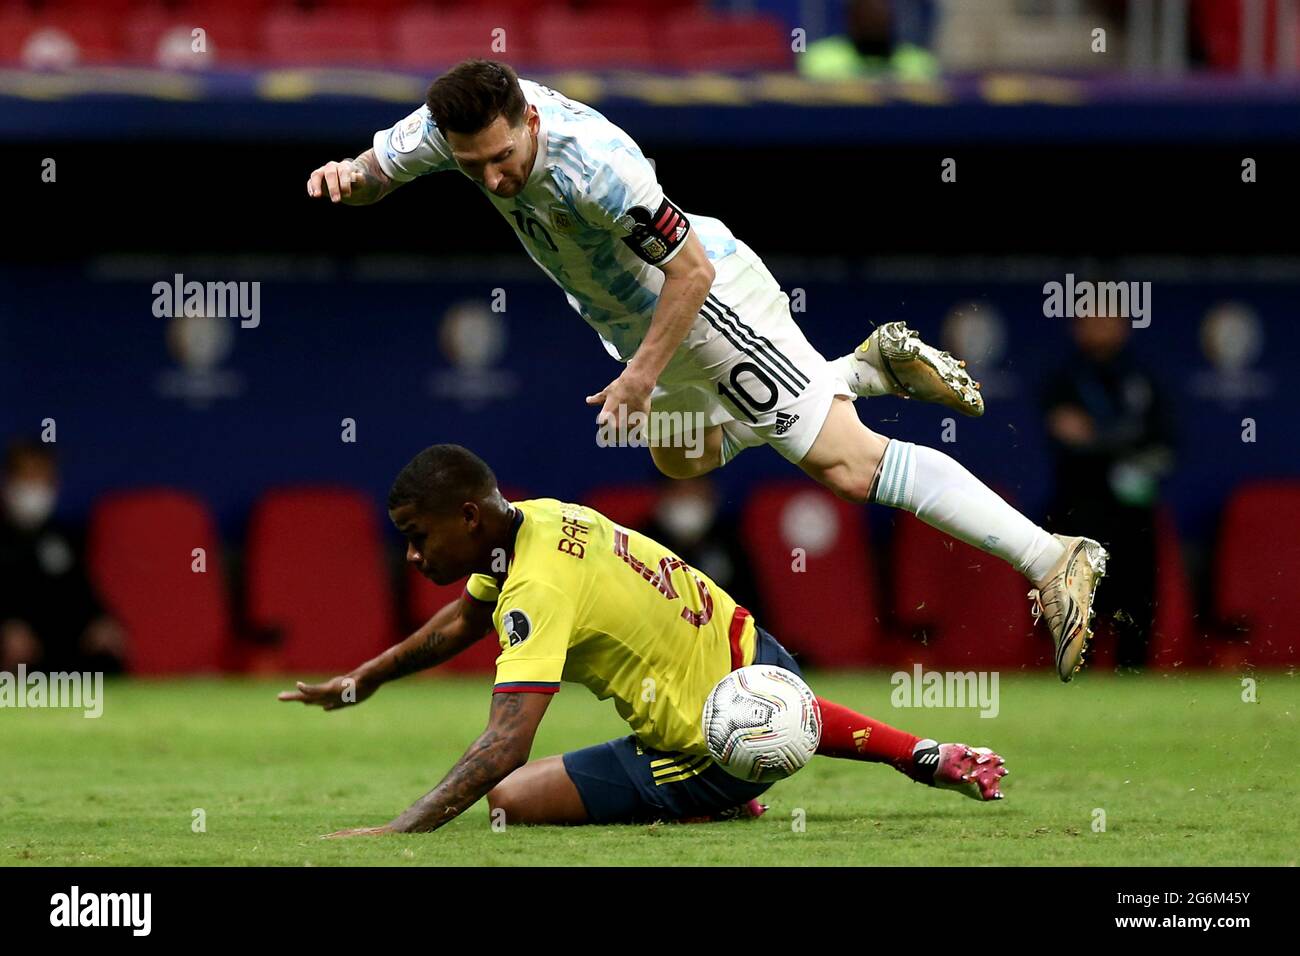 BRASILIA, BRAZIL - JULY 06: Lionel Messi of Argentina competes for the ball with Wilmar Barrios of Colombia ,during the Semifinal match between Argentina and Colombia as part of Conmebol Copa America Brazil 2021 at Mane Garrincha Stadium on July 6, 2021 in Brasilia, Brazil. (MB Media) Stock Photo